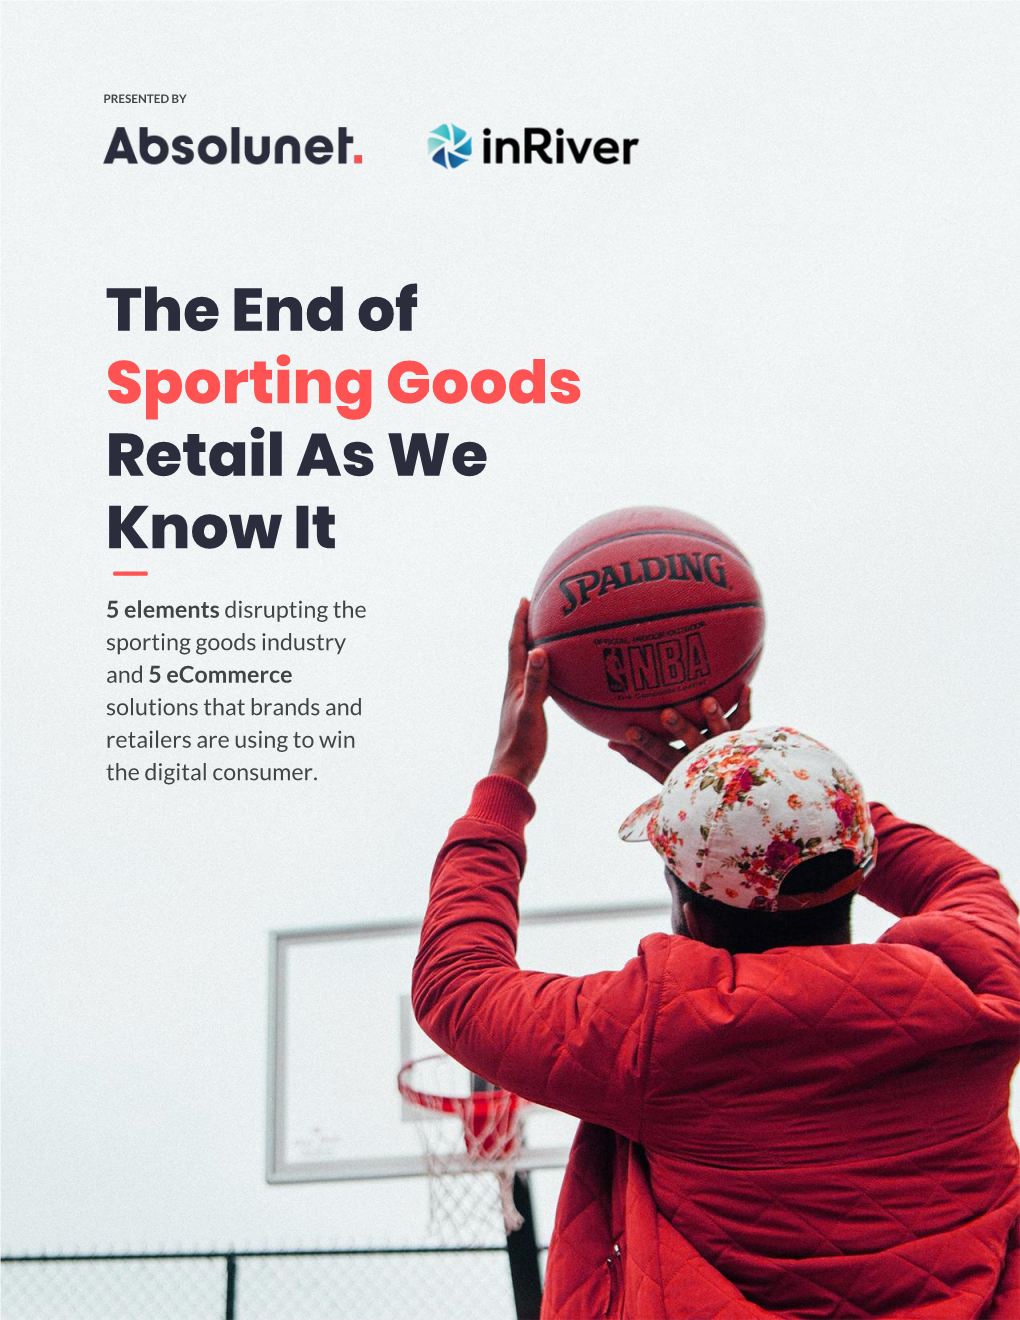 The End of Sporting Goods Retail As We Know It